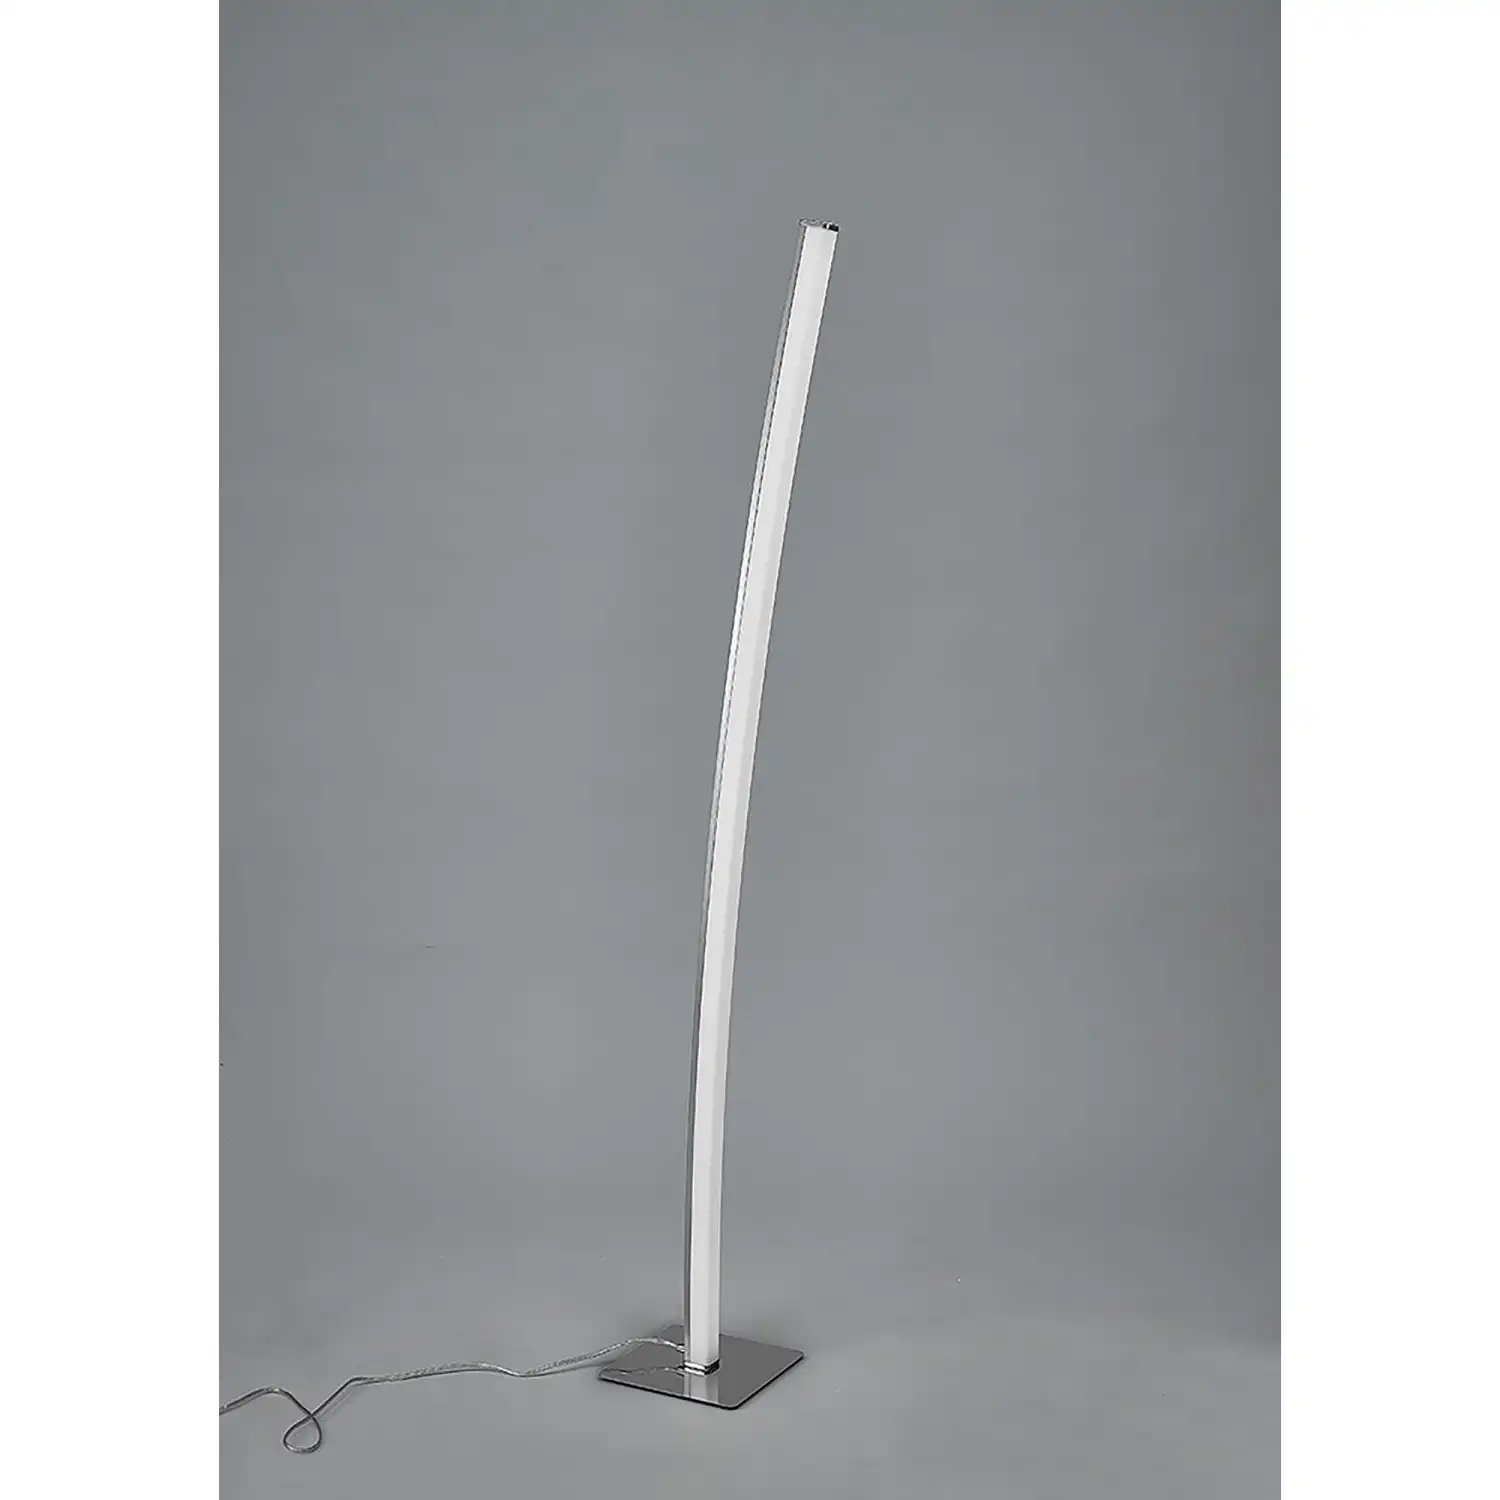 Surf Floor Lamp 23W LED Satin Nickel Polished Chrome 3000K, 1590lm, Touch Dimmer 3yrs Warranty